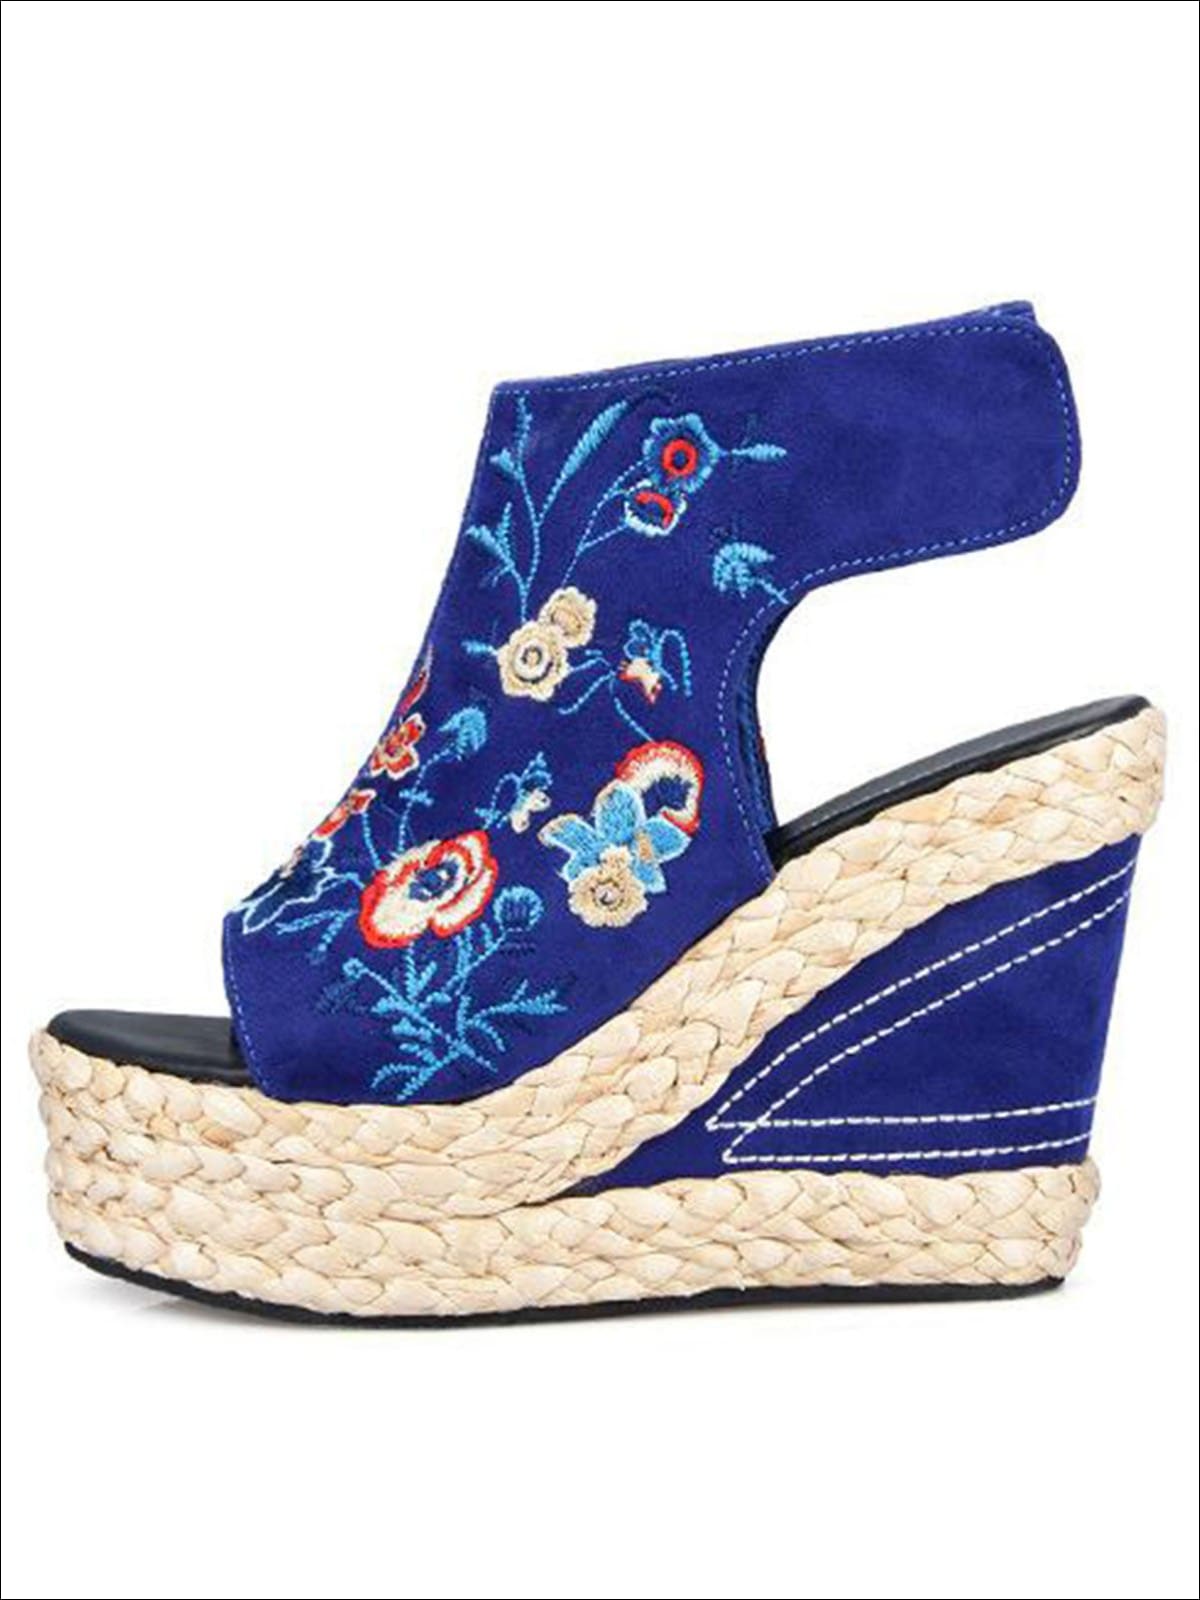 Women's Floral Embroidered High Heel Wedges – Mia Belle Girls